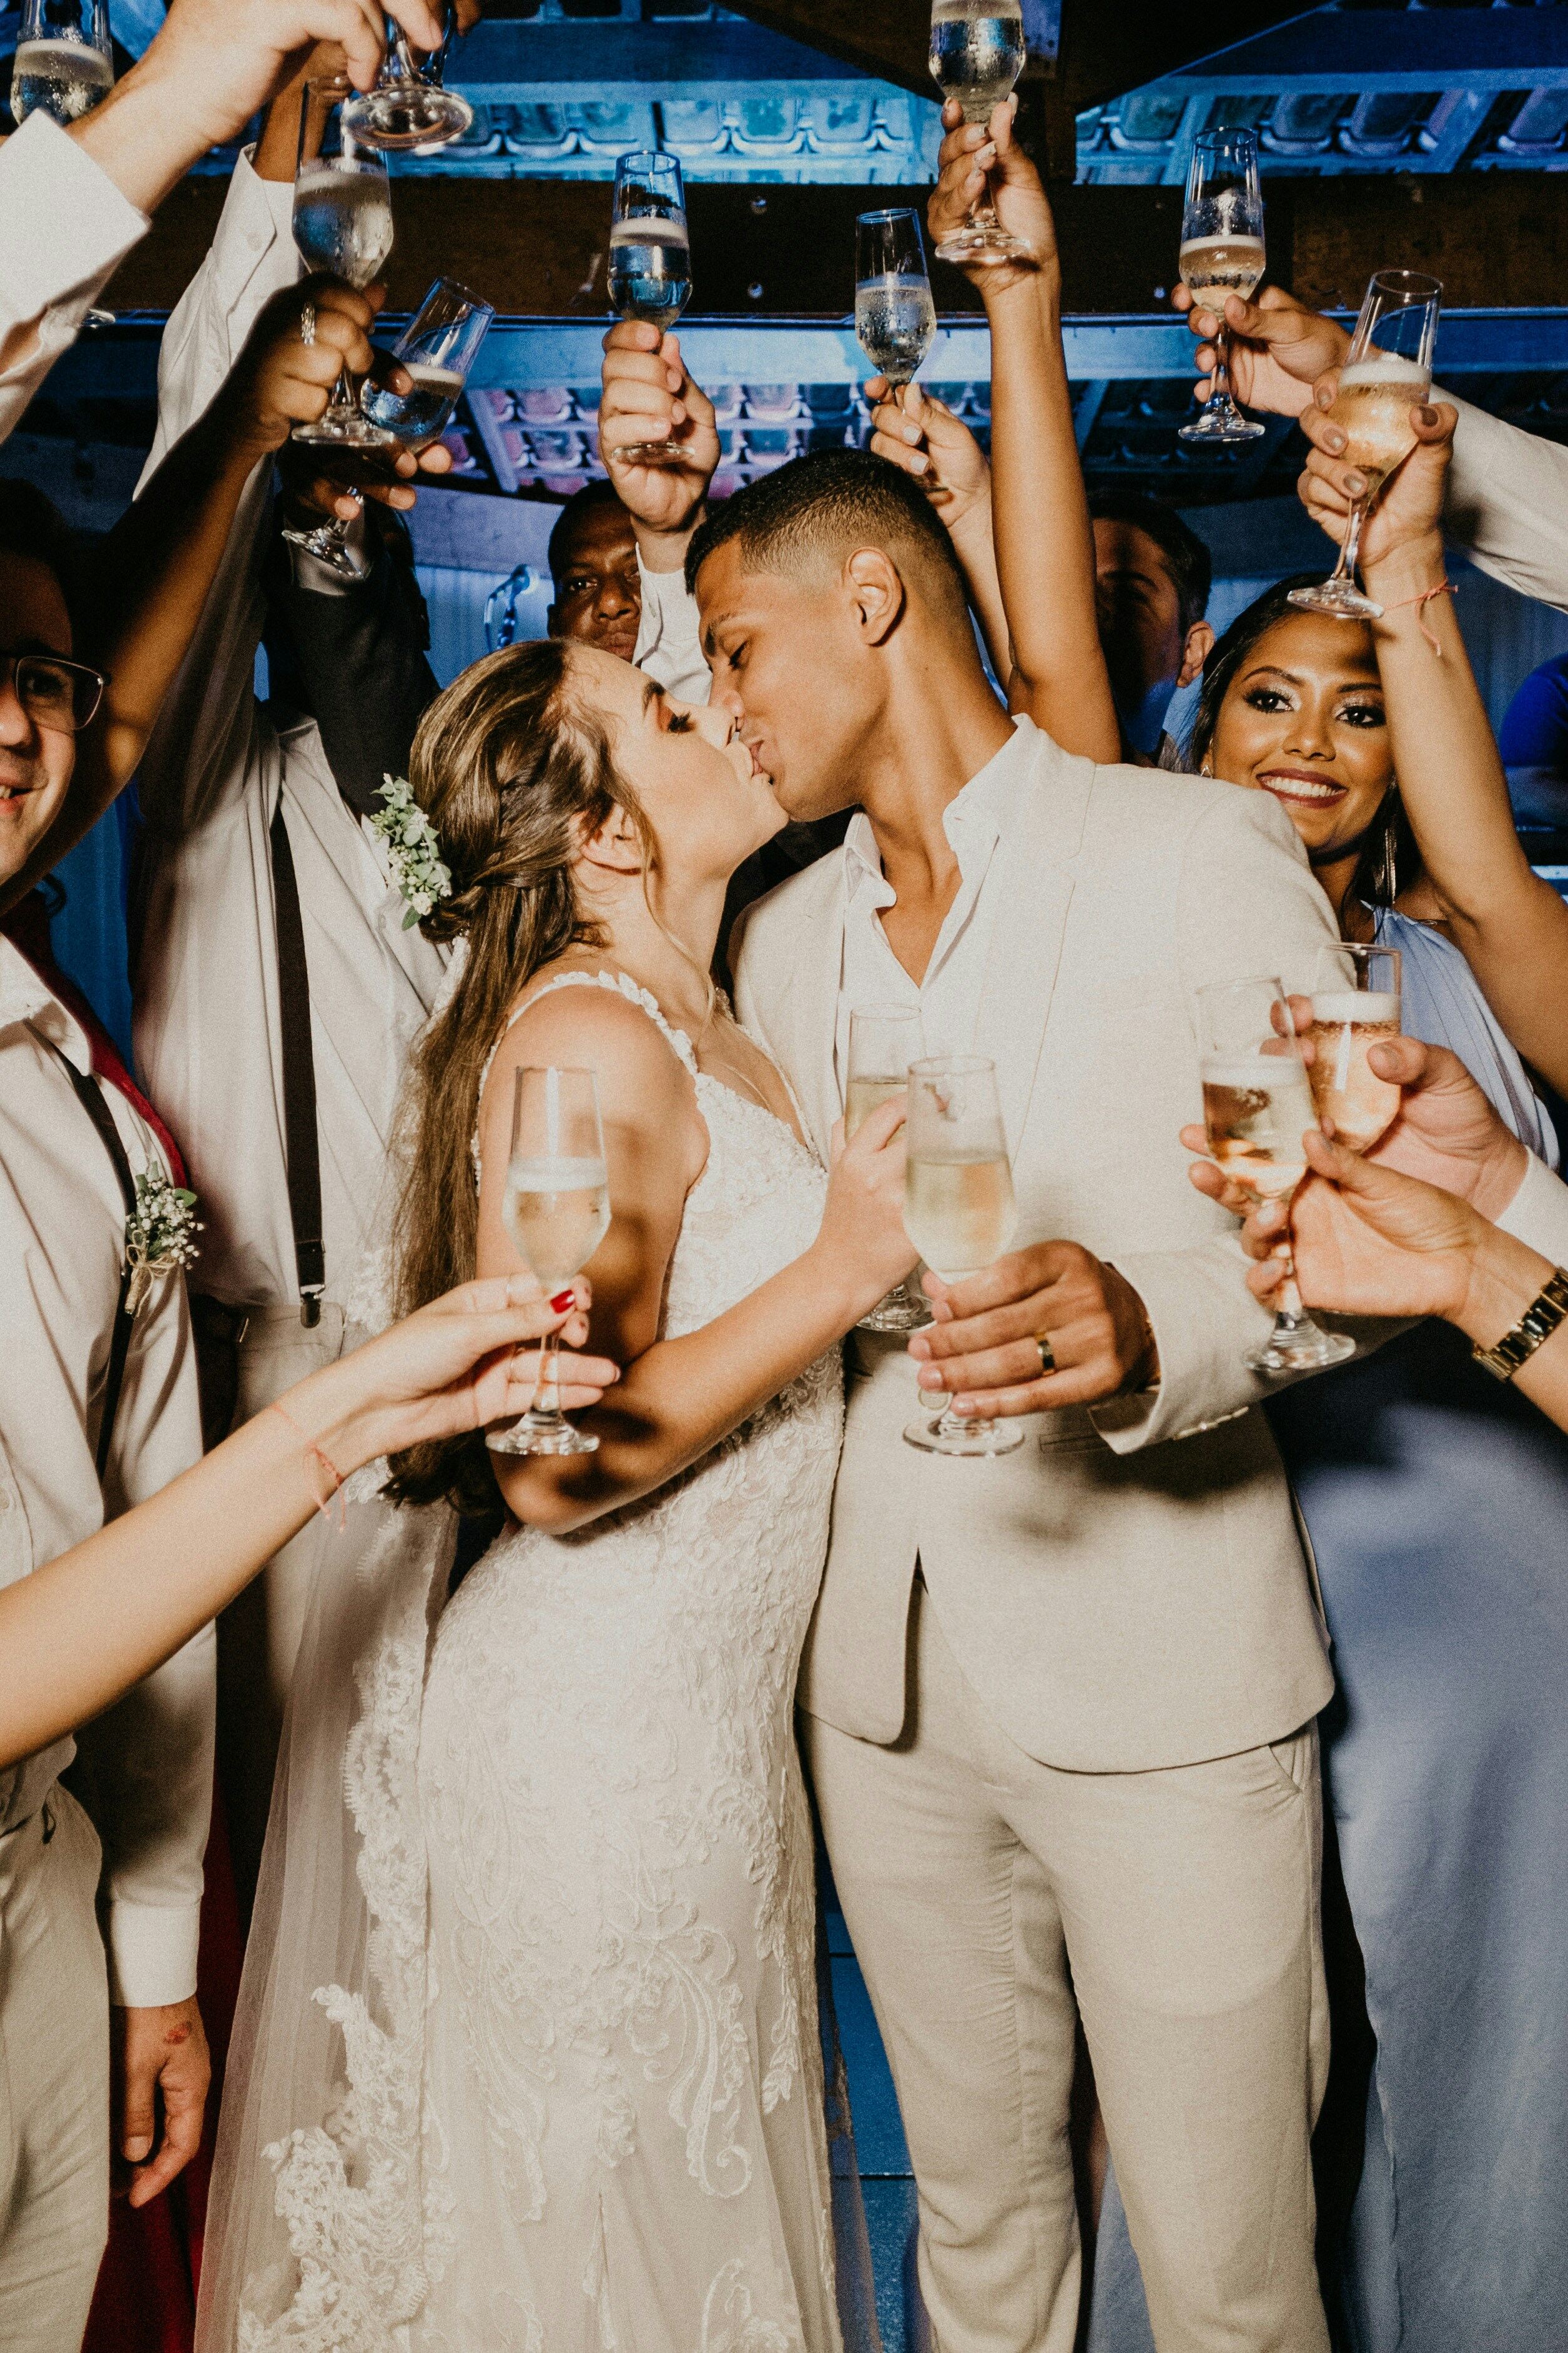 How To Host Perfect Bachelor's/Bachelorette For Your Friends 